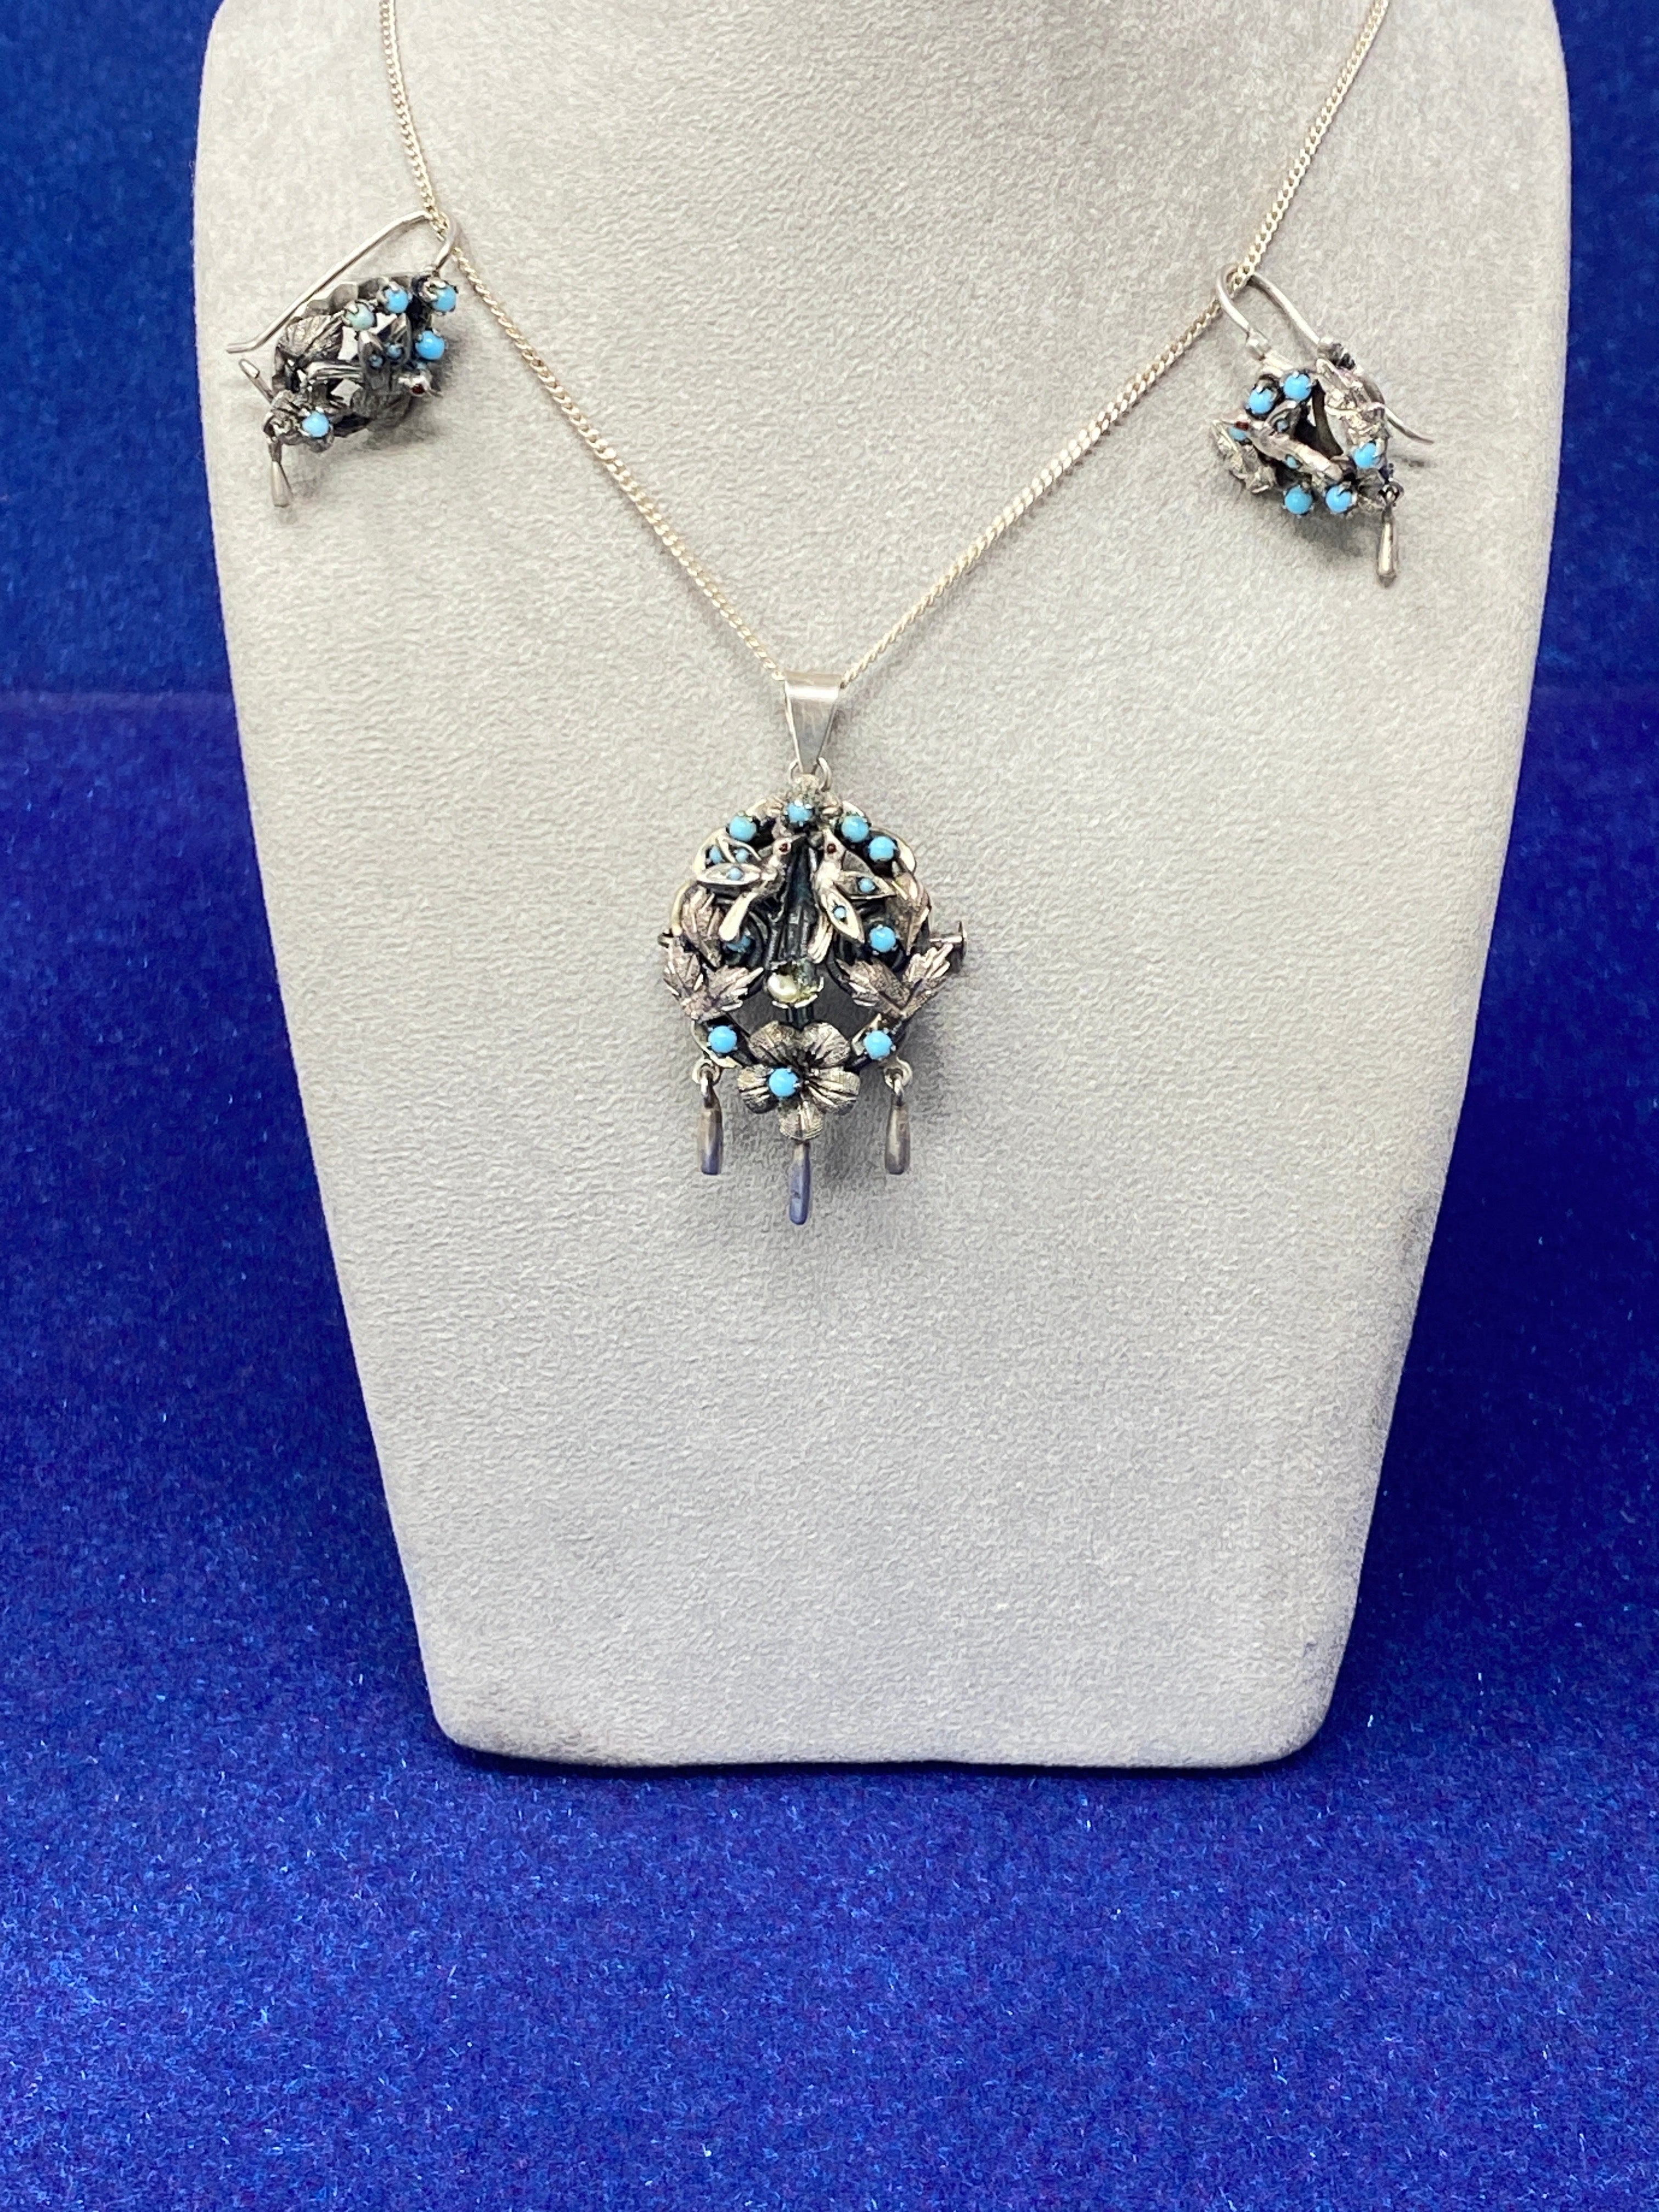 Vintage Silver and Turquoise Necklace and Earrings